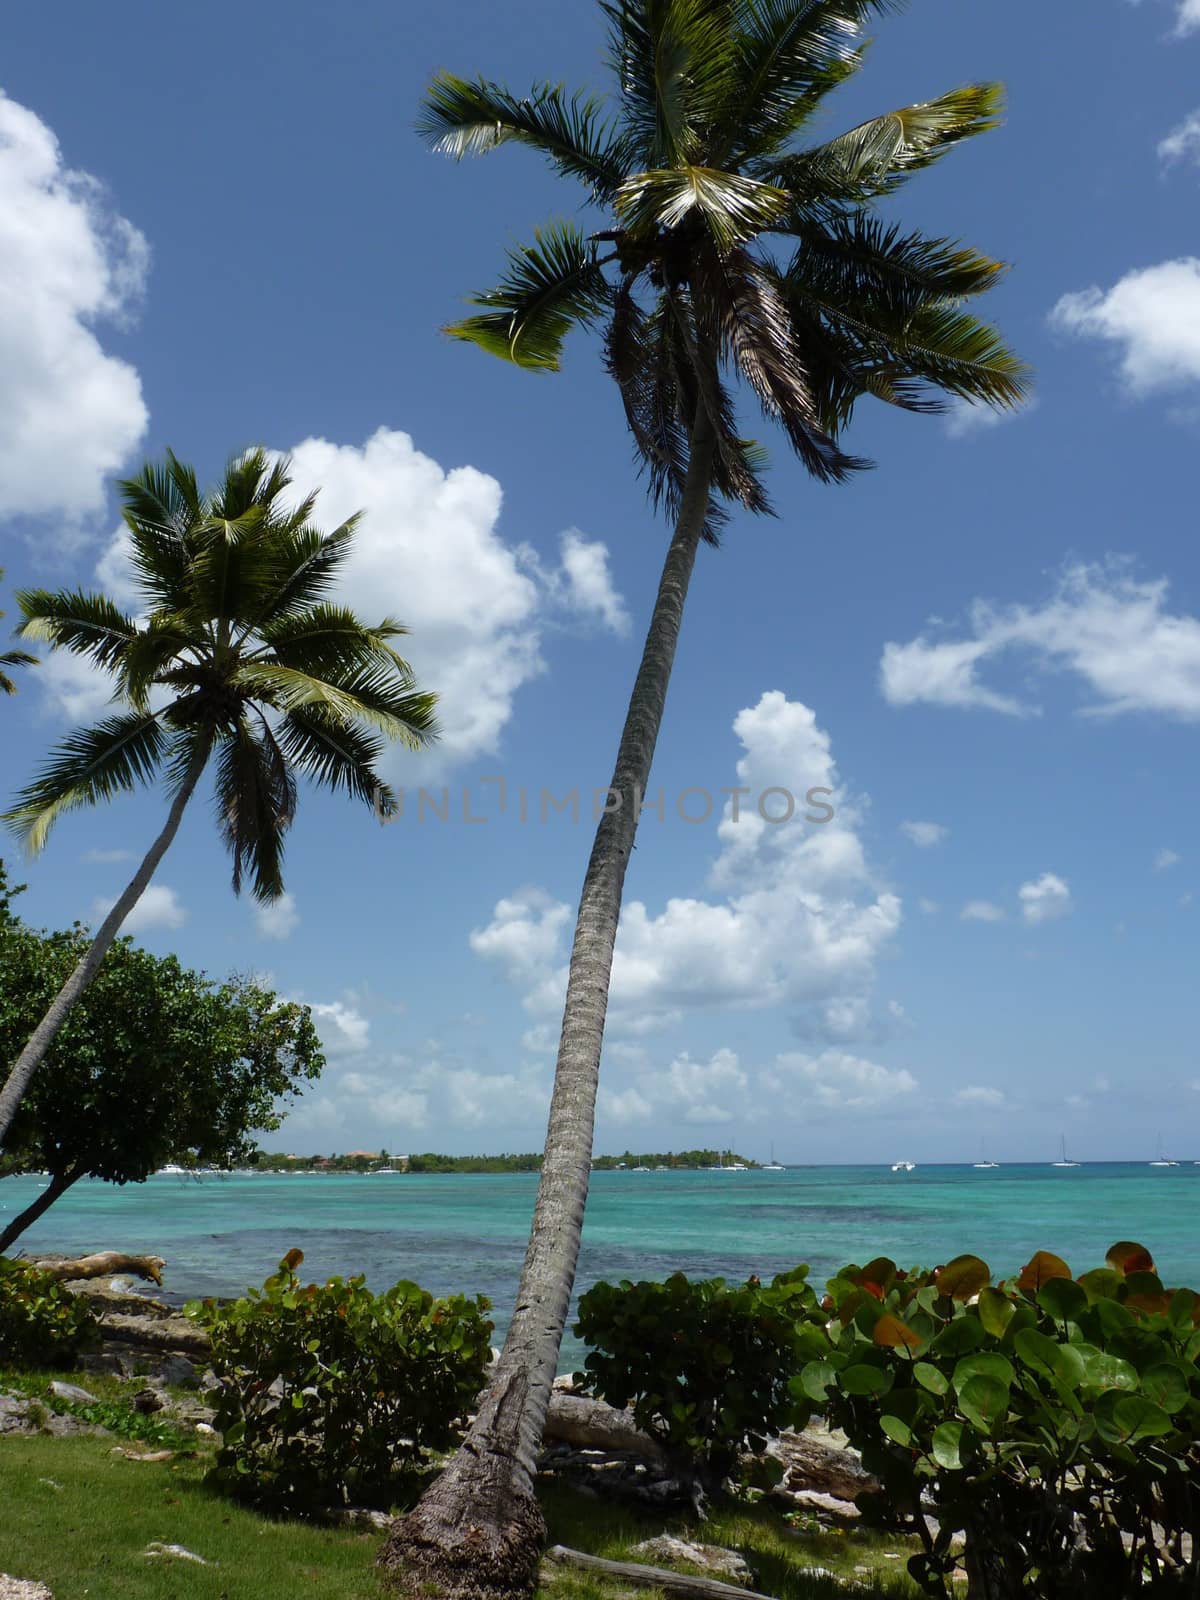 Palm trees at the Beach of Bayahibe, Dominican Republic